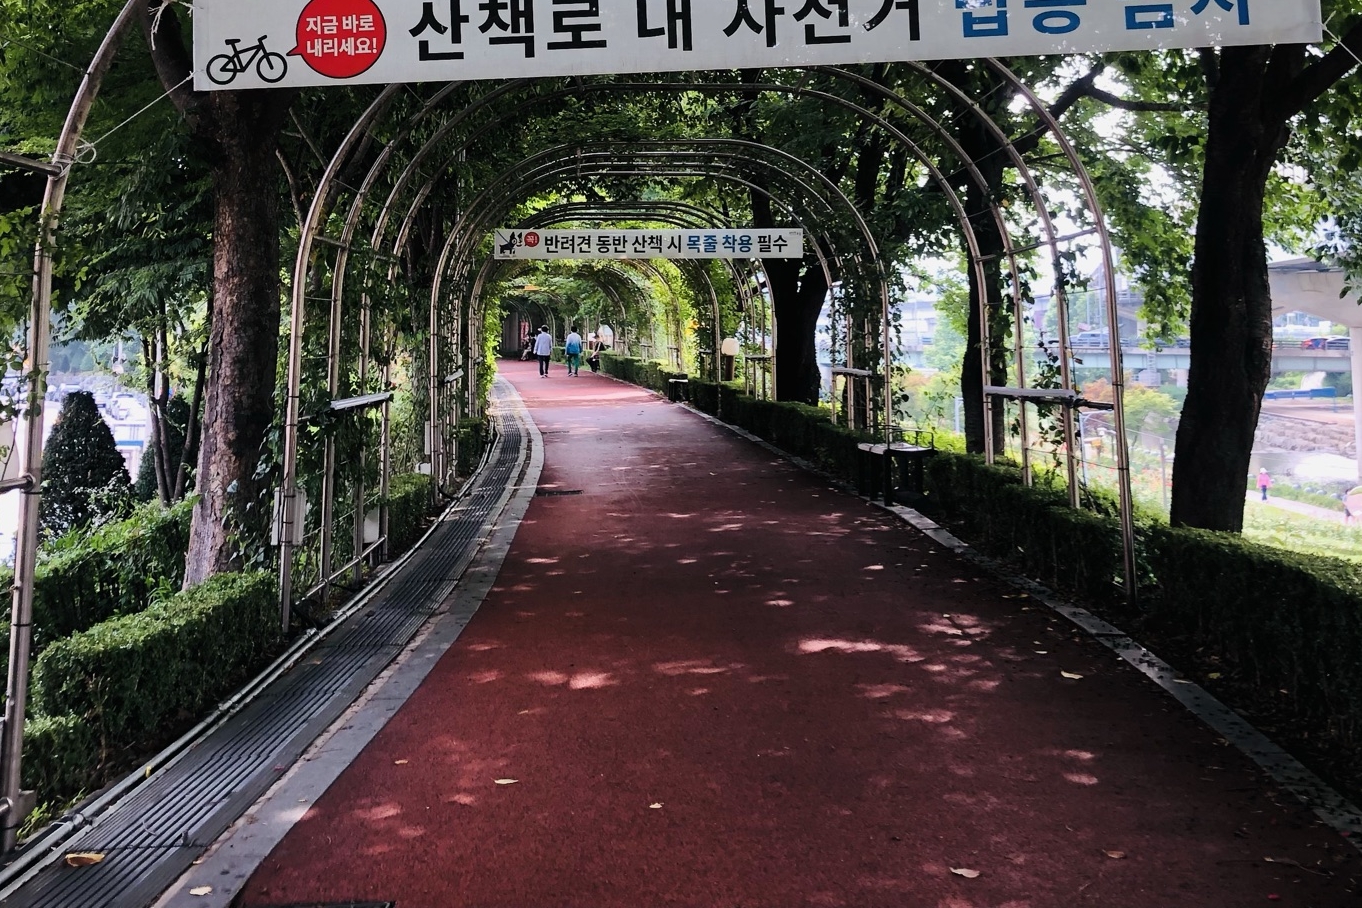 Entryway and Main entrance0 : Entryway to Seoul Rose Park (Jungnang Rose Park) 3